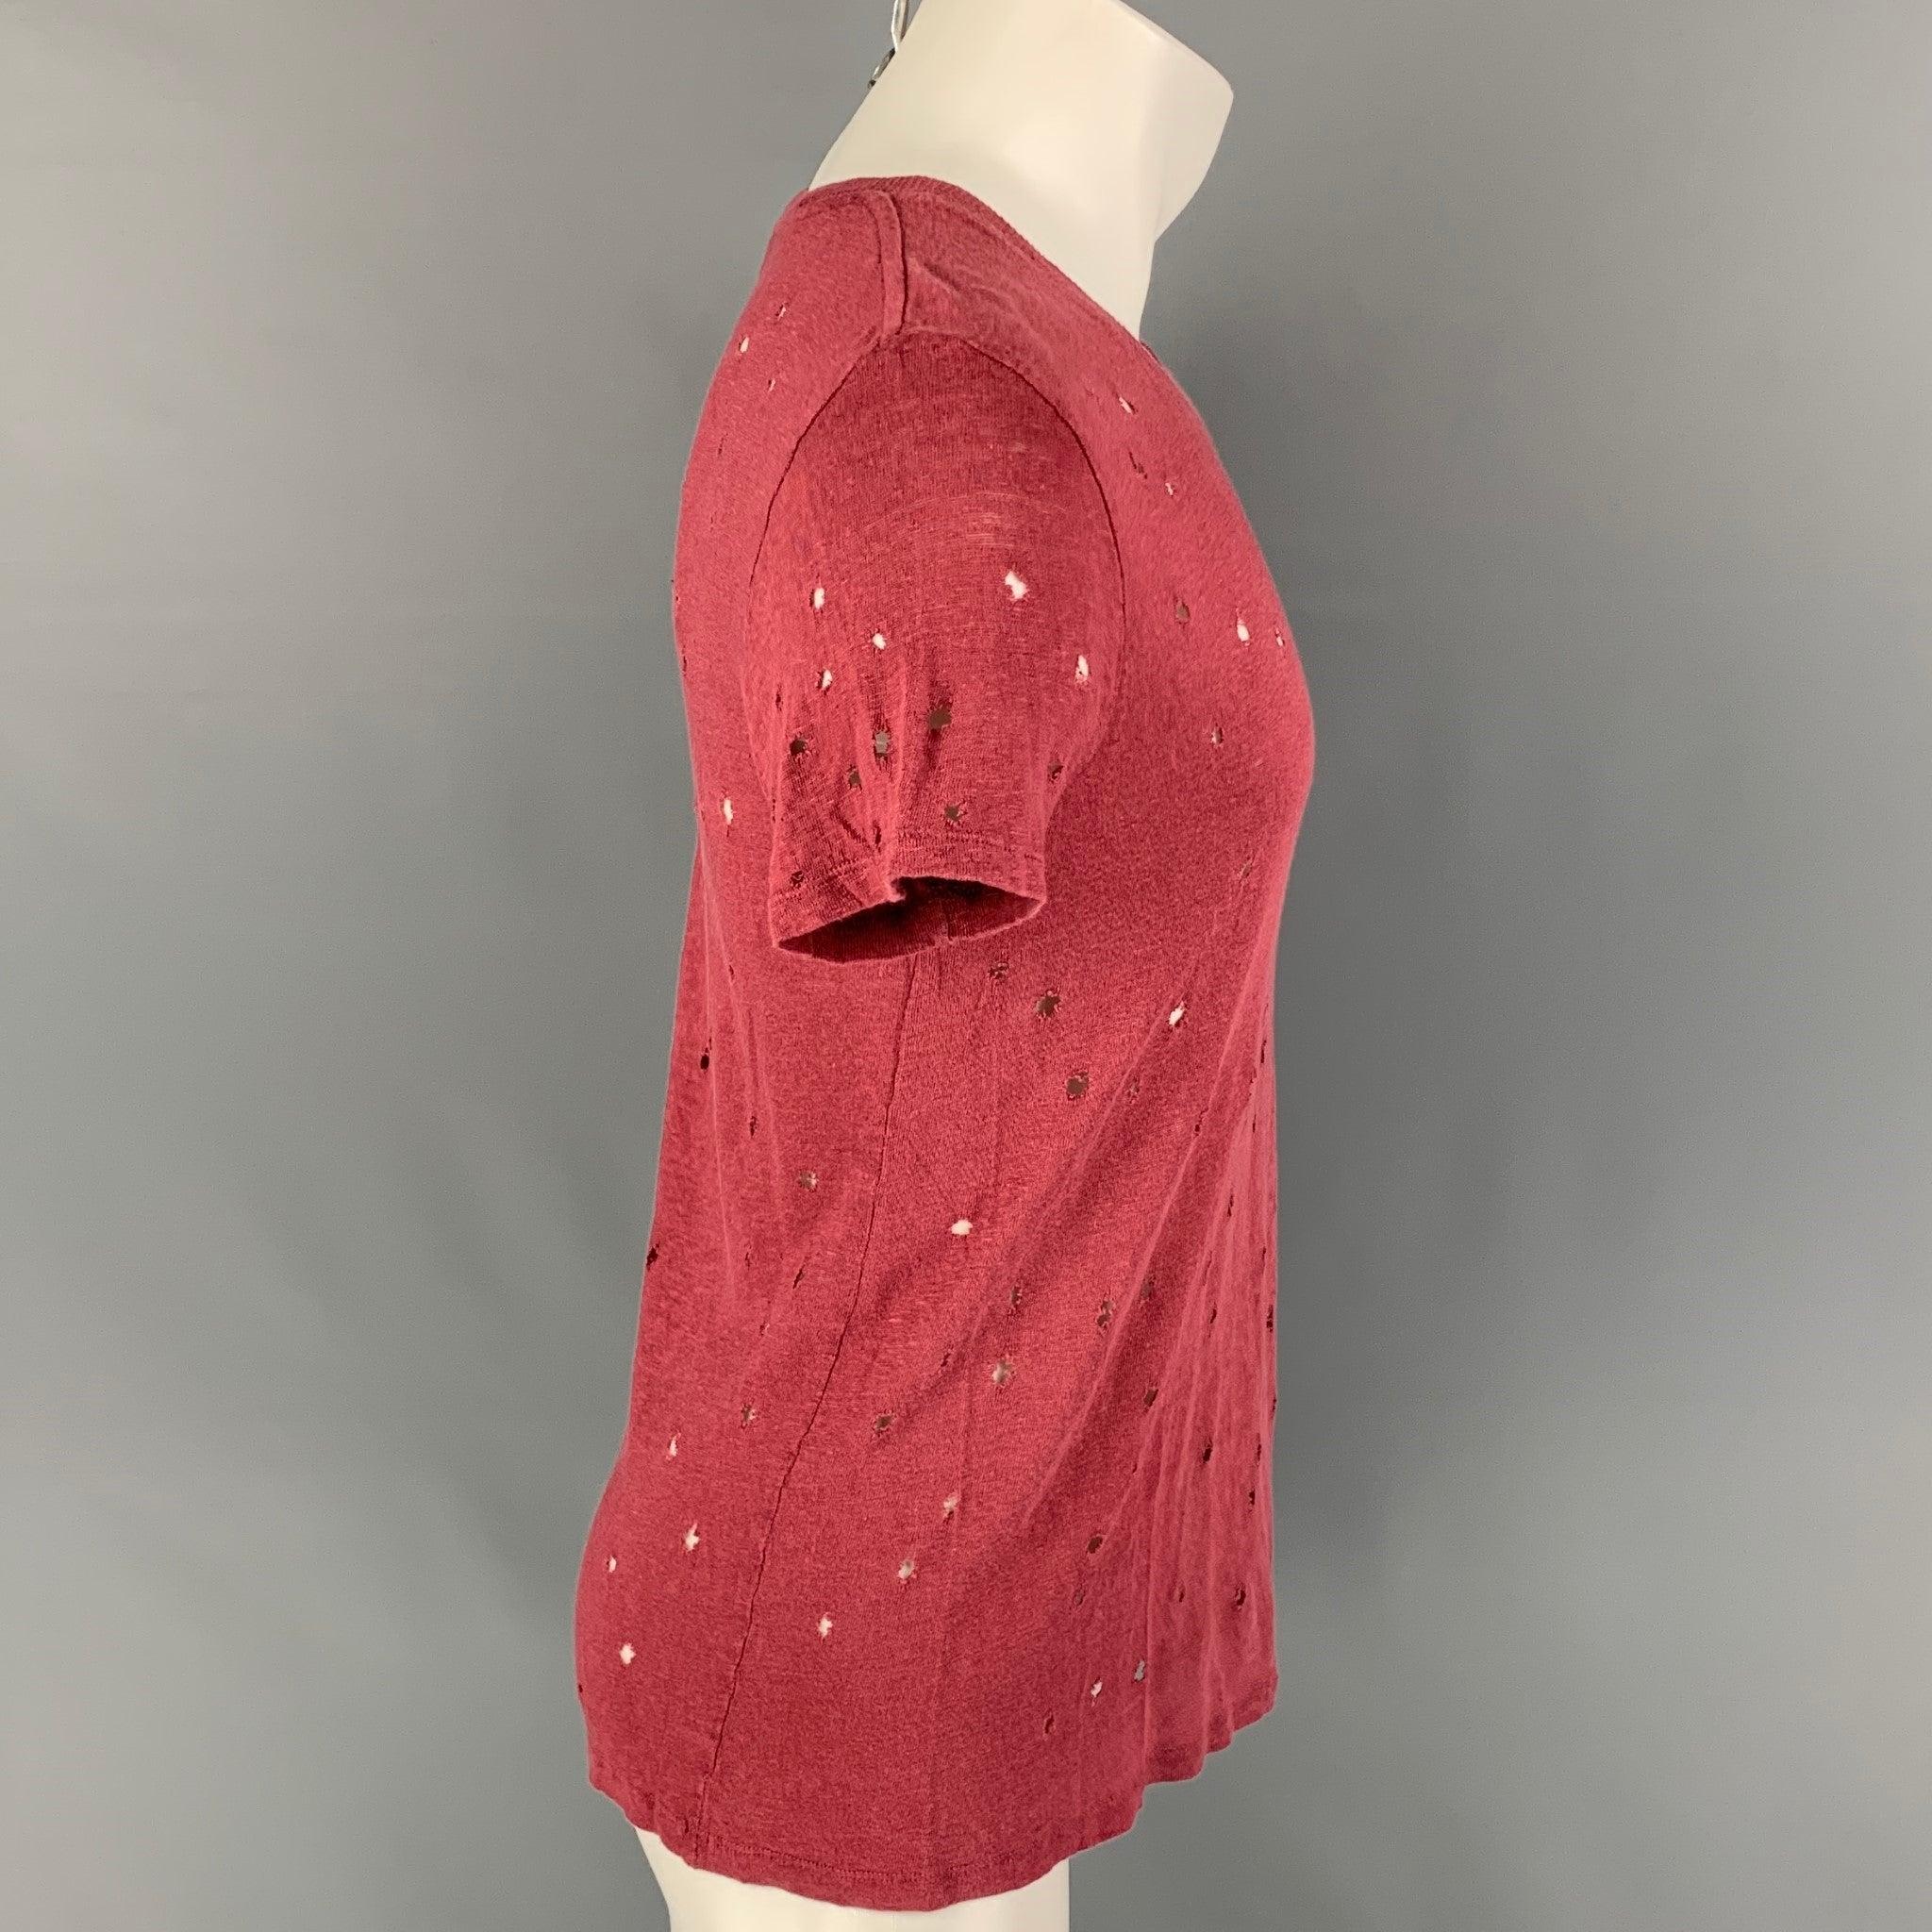 IRO 'Clay' t-shirt comes in a burgundy linen featuring distressed details throughout and a crew-neck. Made in Portugal.
Very Good Pre-Owned Condition.  

Marked:   S 

Measurements: 
 
Shoulder: 18 inches  Chest: 38 inches  Sleeve: 8 inches Length: